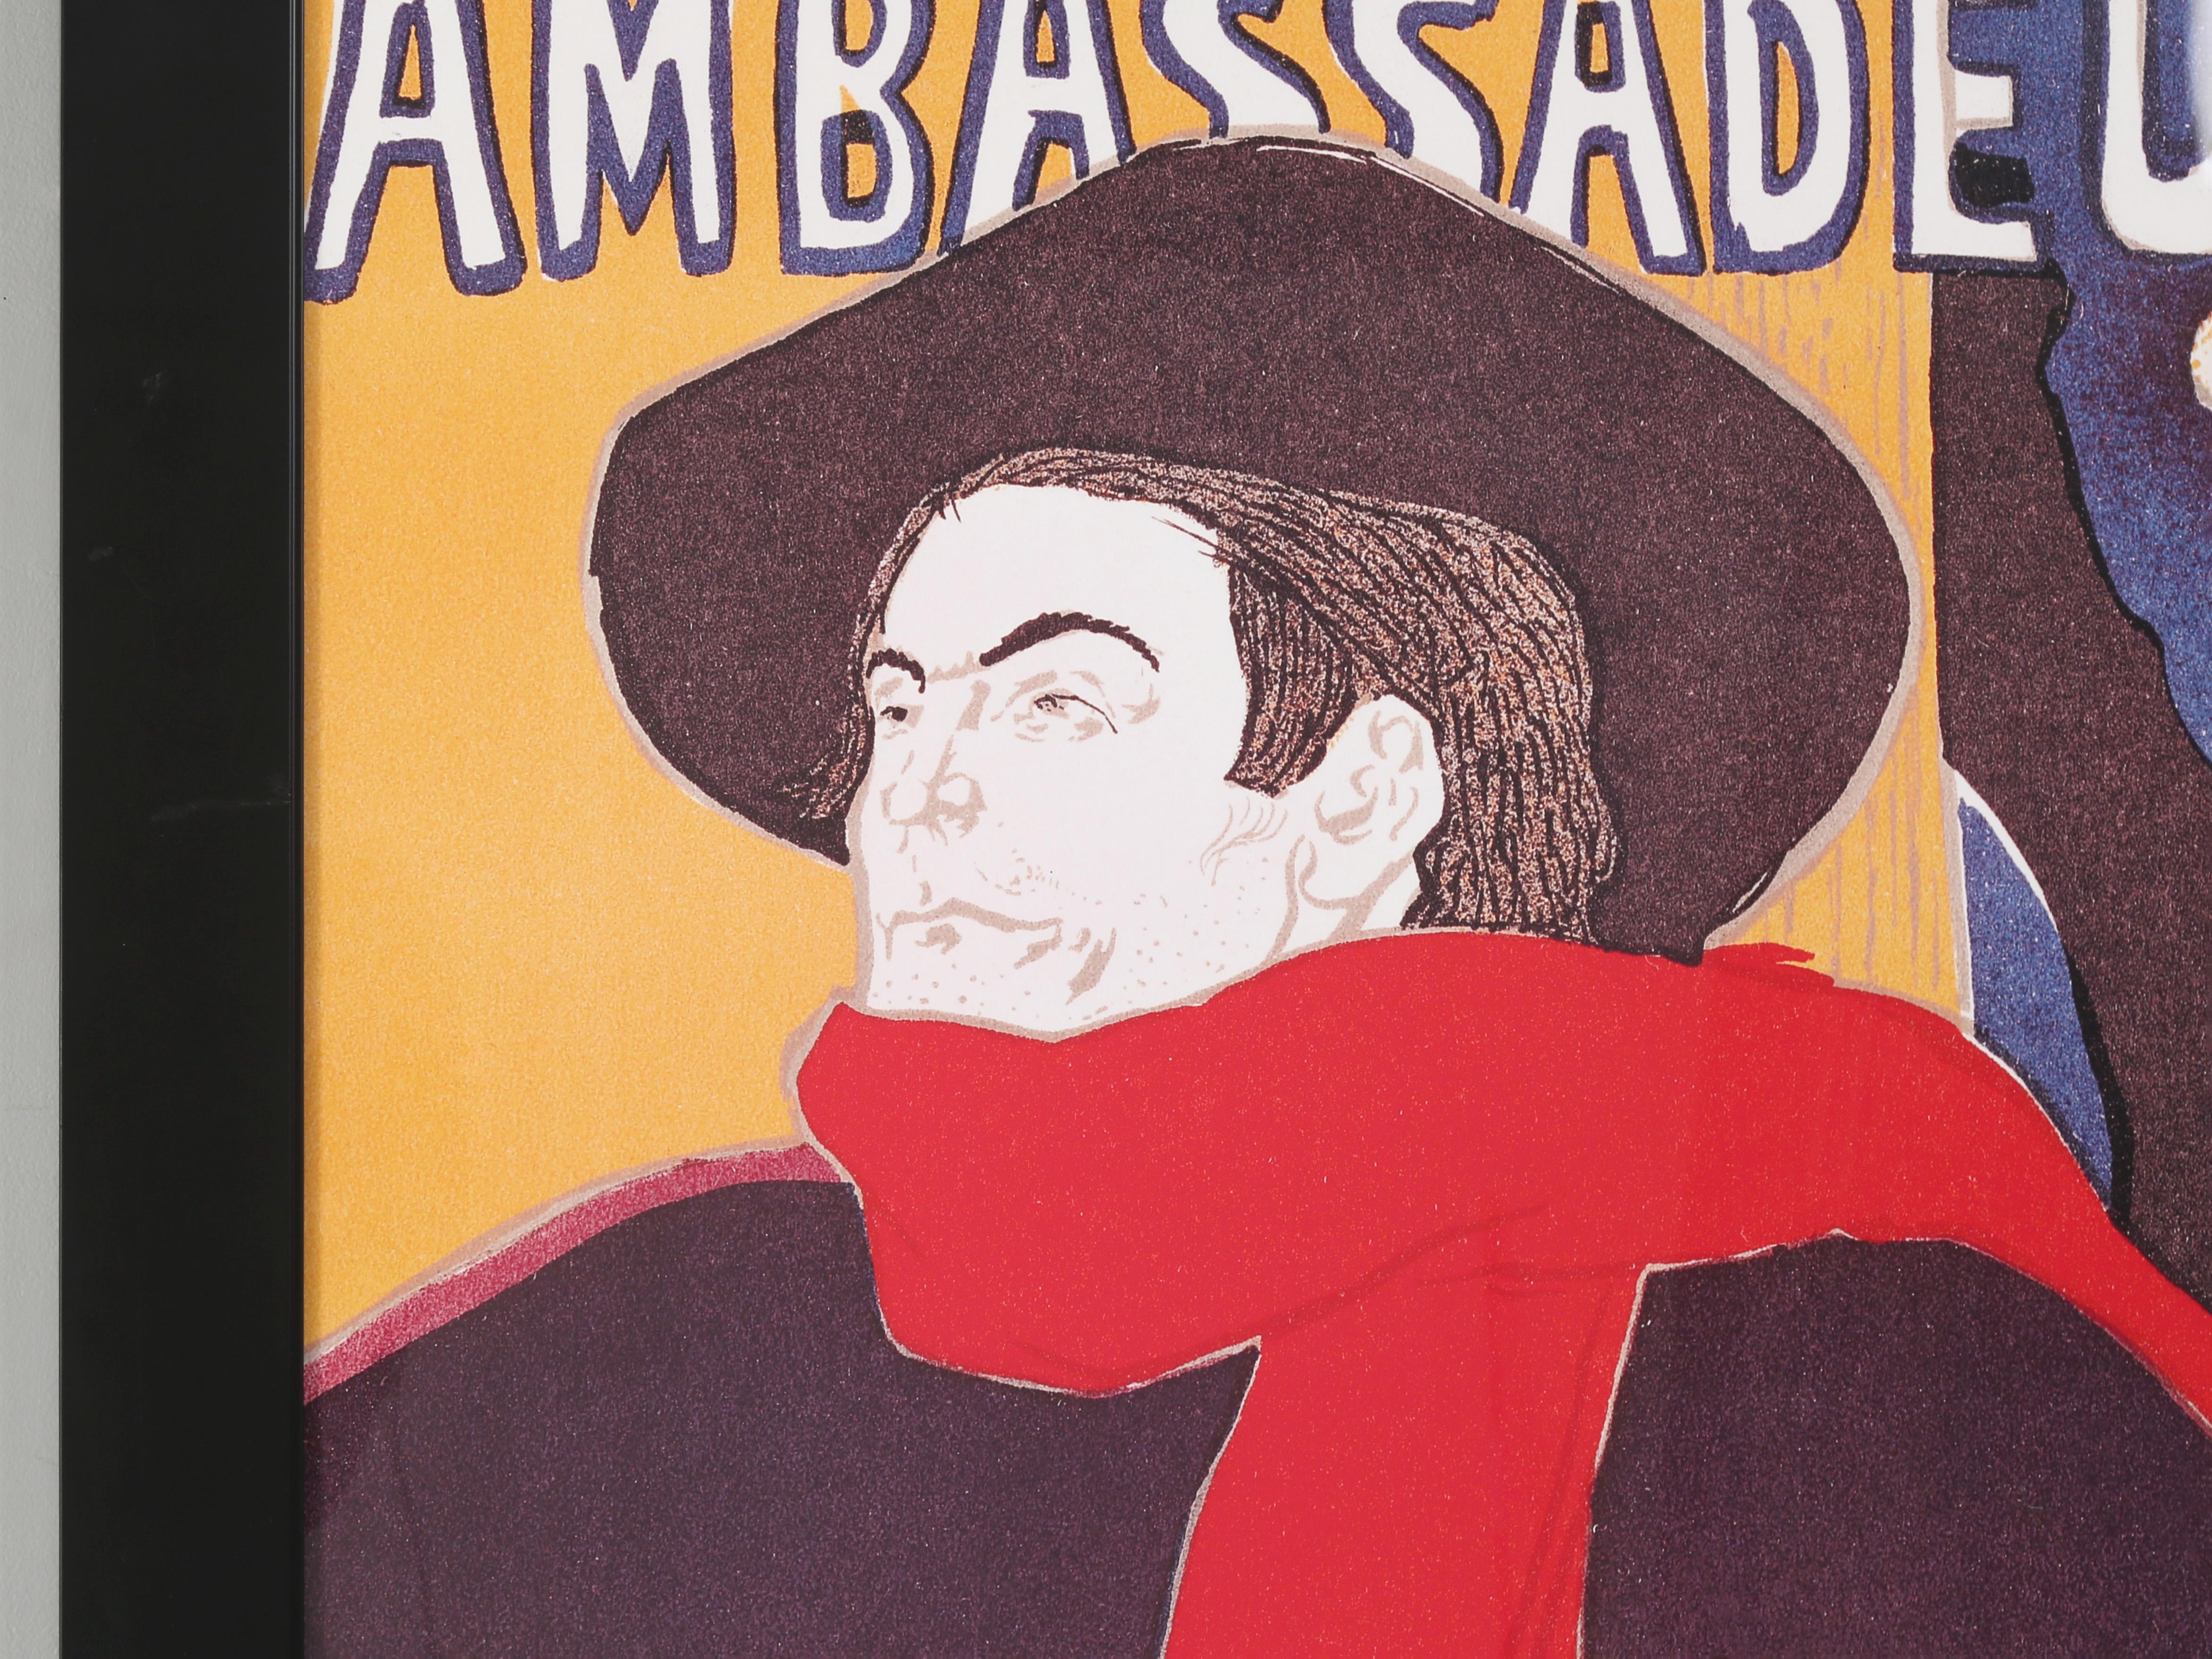 French Ambassadeurs: Aristide Bruant Originally by Toulouse-Lautrec 1982 Reproduction For Sale